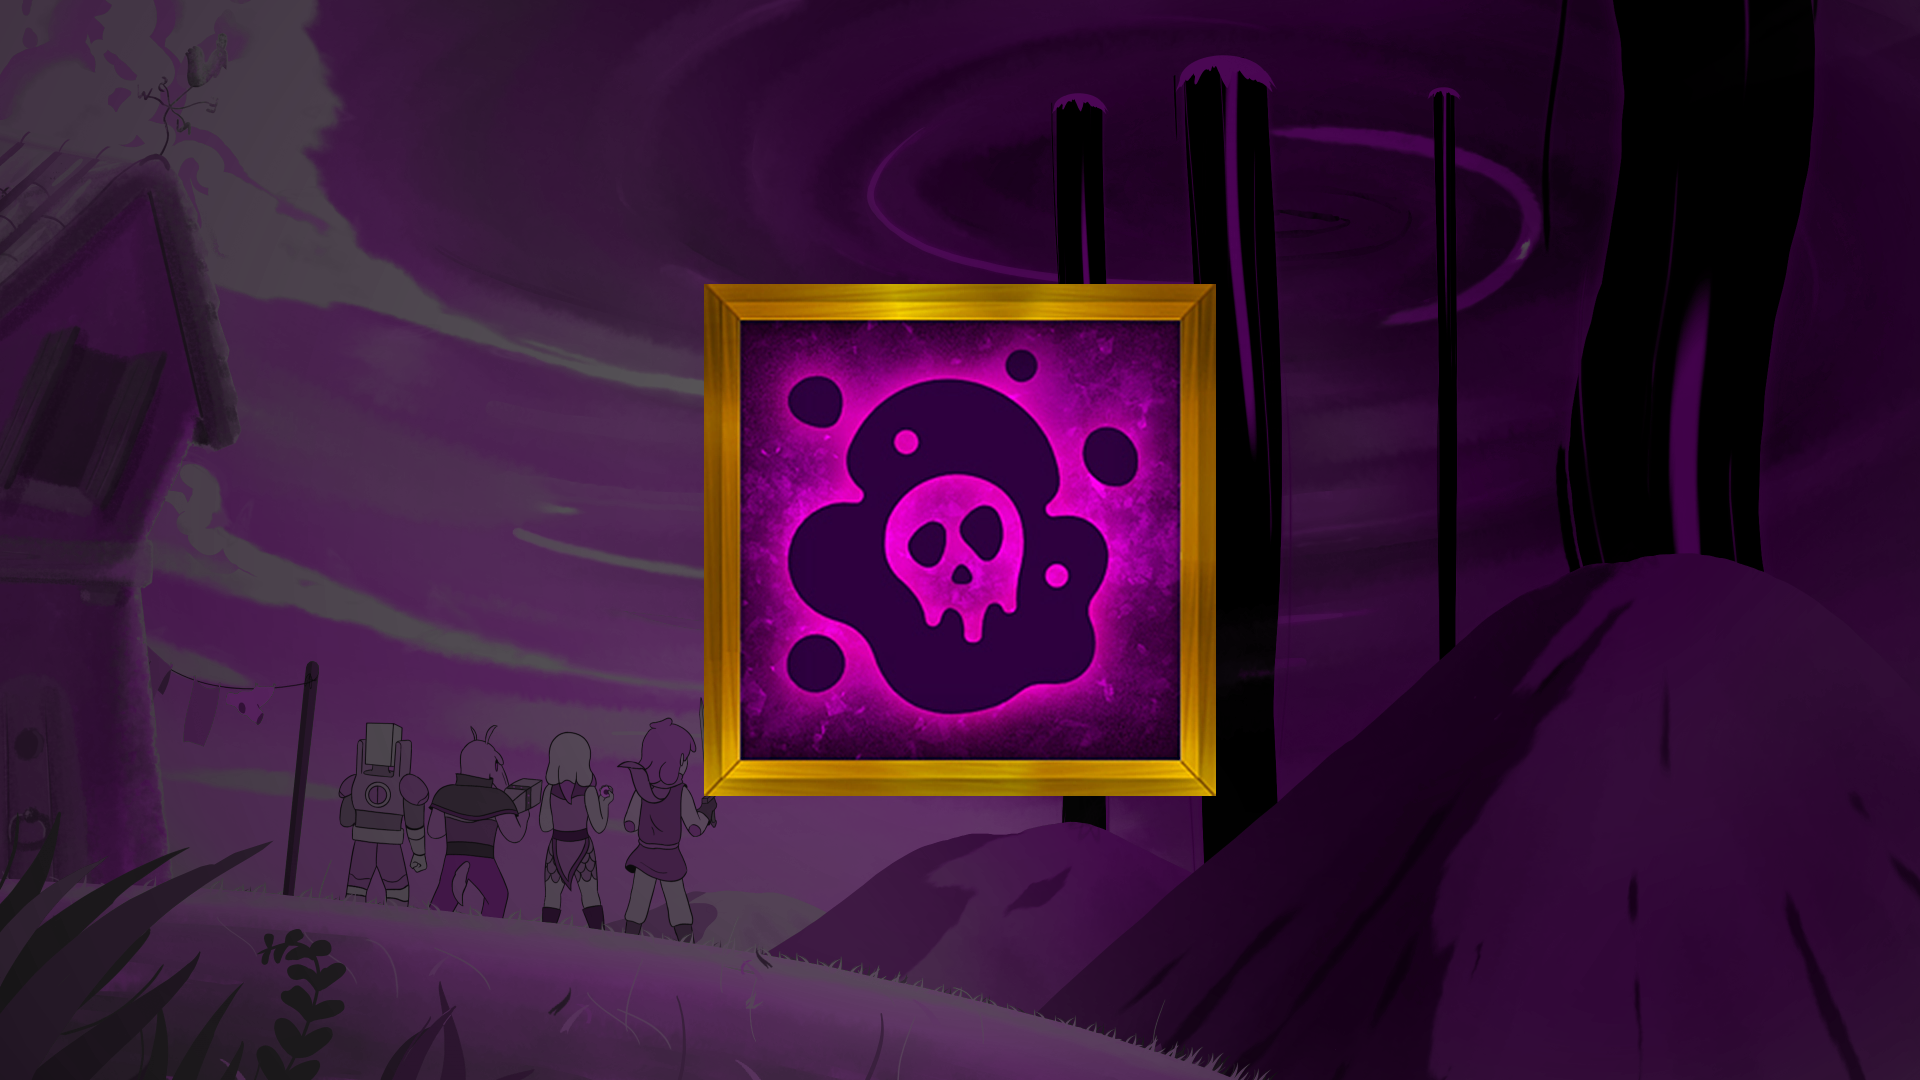 Icon for Poisoned